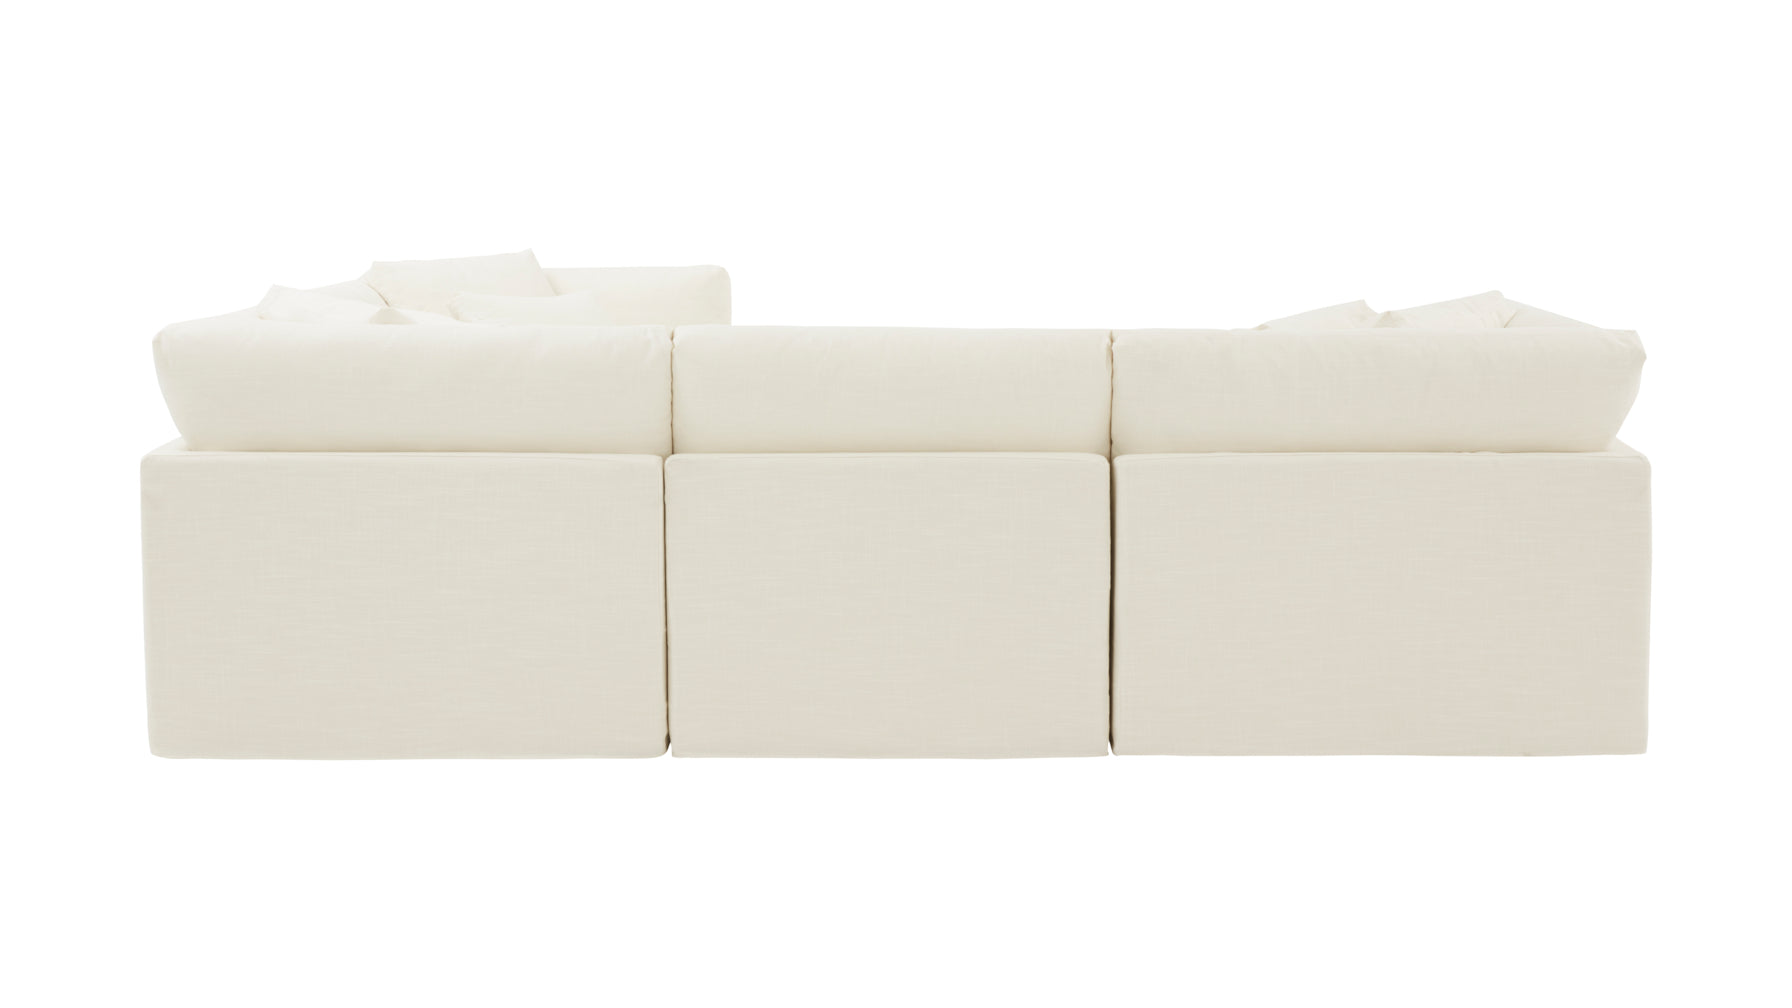 Get Together™ 4-Piece Modular Sectional Closed, Large, Cream Linen - Image 7